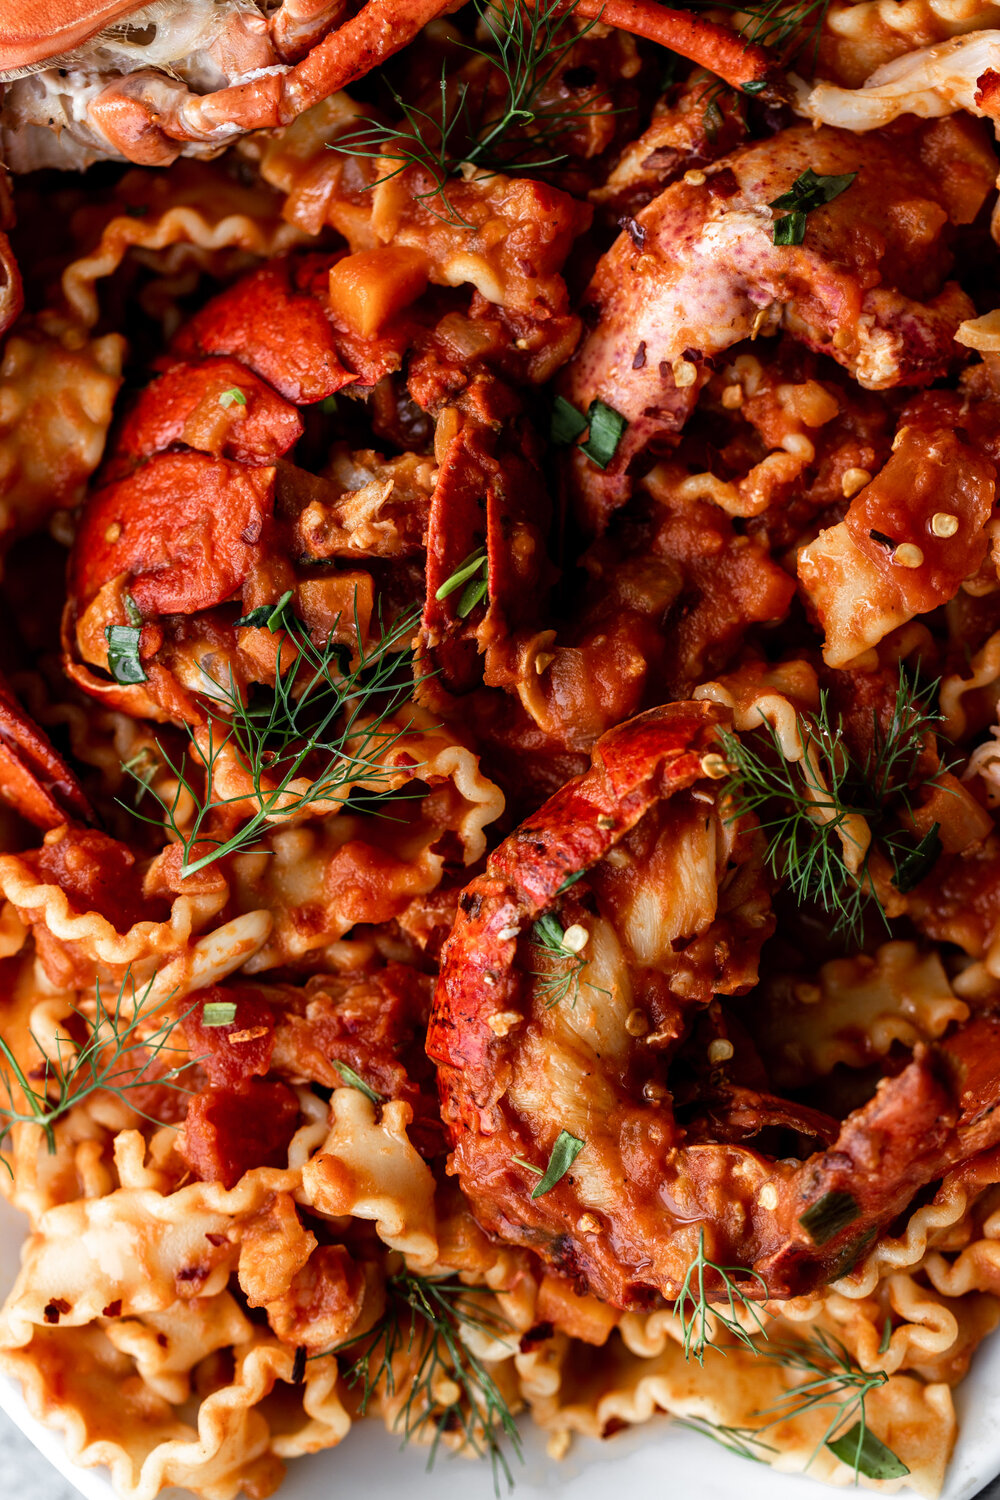 In this lobster fra diavolo recipe pasta is tossed in a tomato-based spicy arrabbiata sauce with whole lobsters.